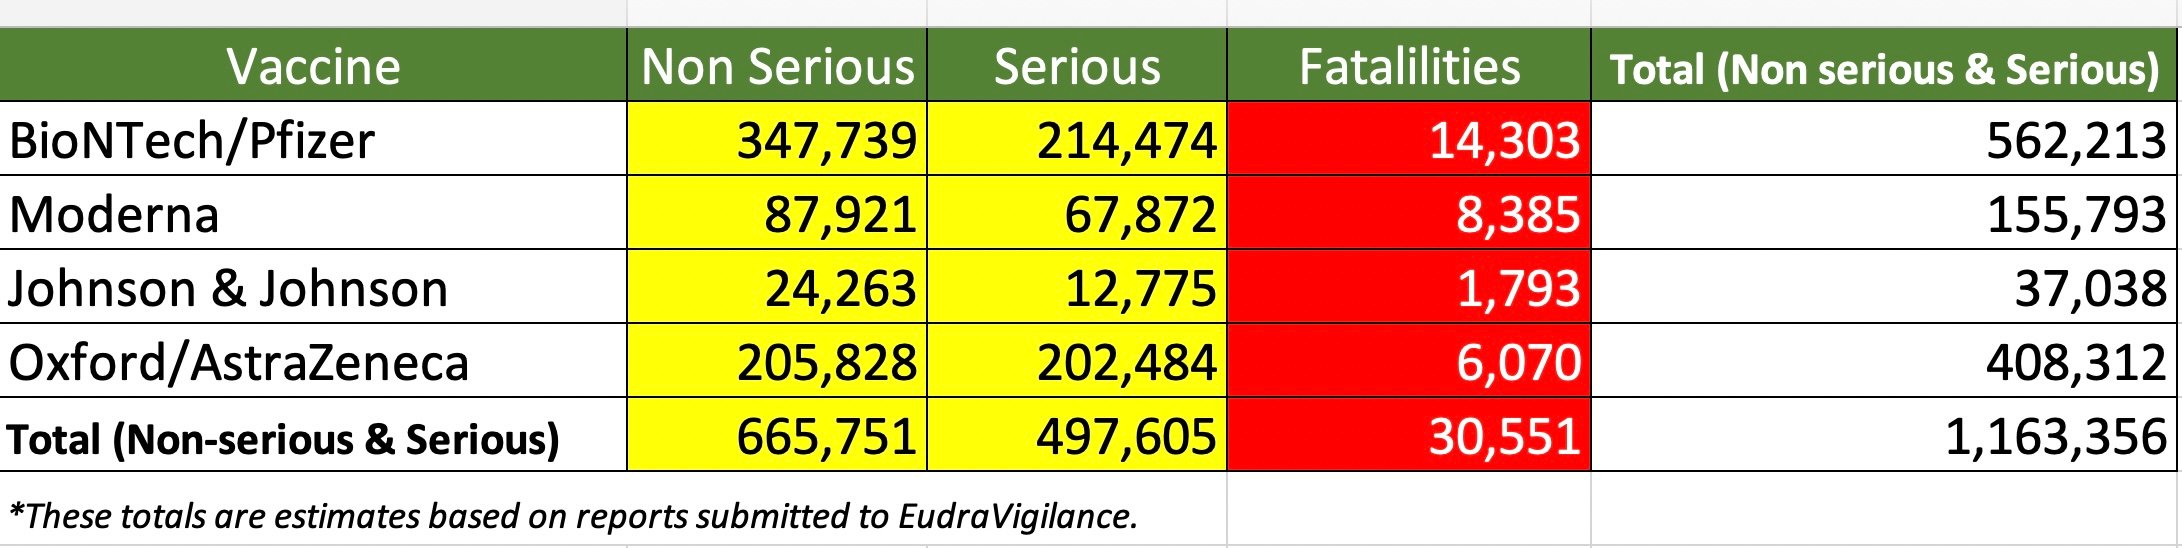 all vaccine fatalities and injuries following covid 19 vaccines, in europe